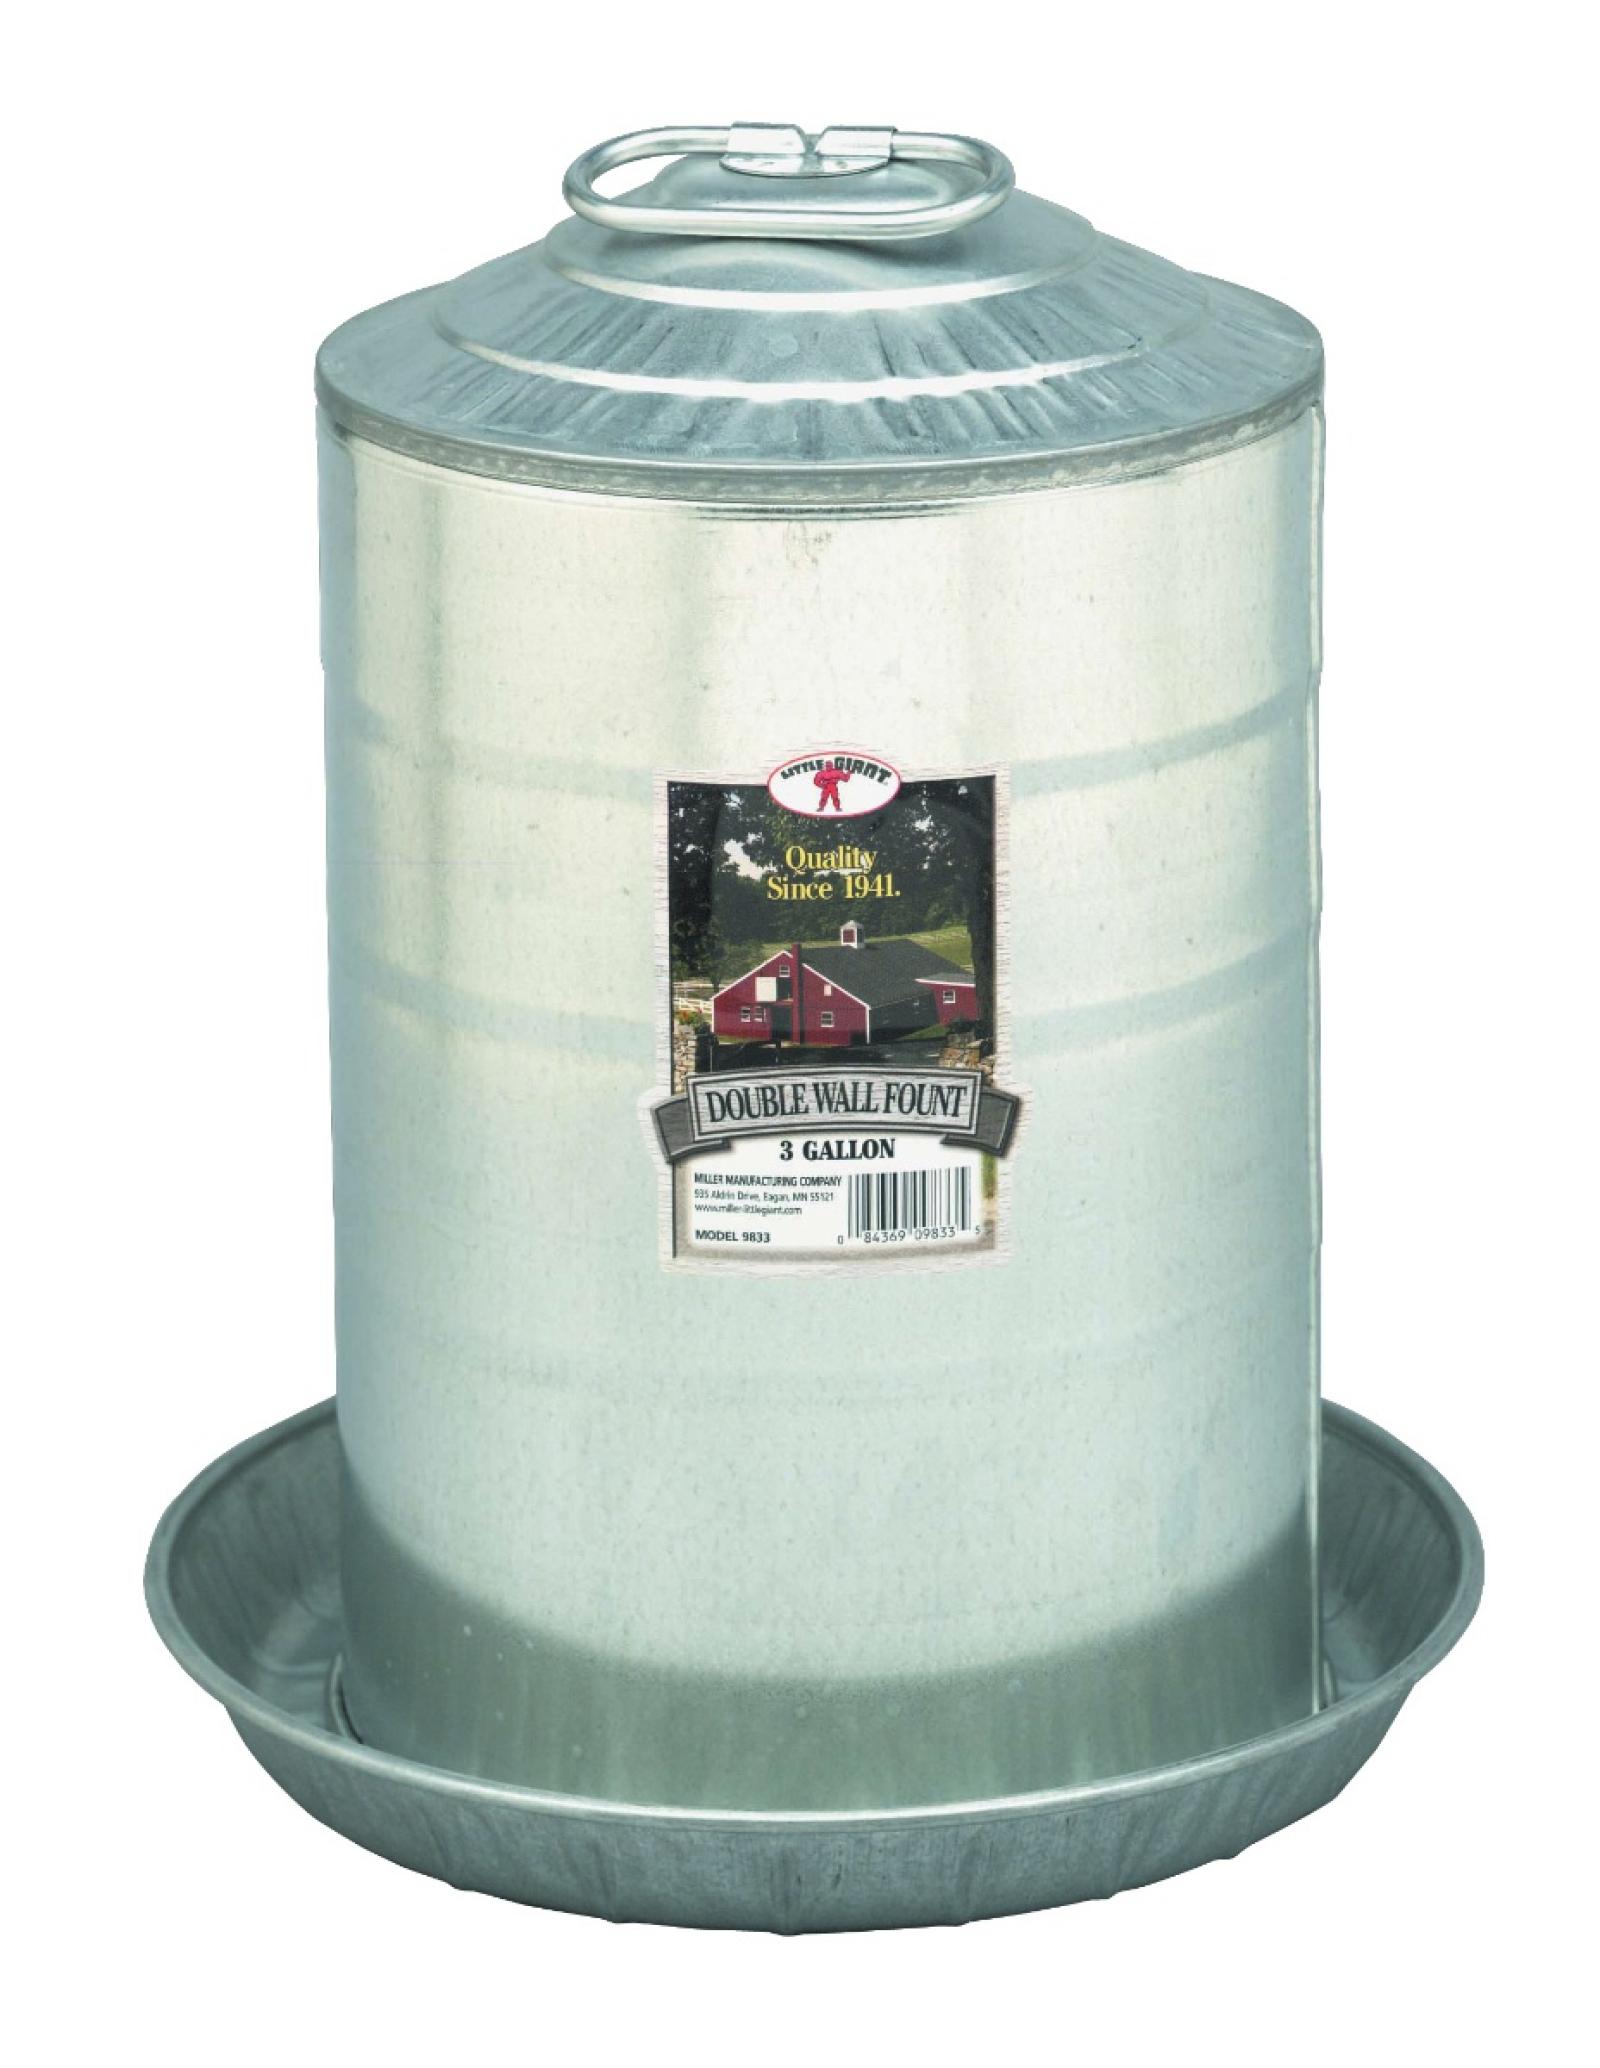 Little Giant 3 Gallon Double Wall Metal Poultry Fount